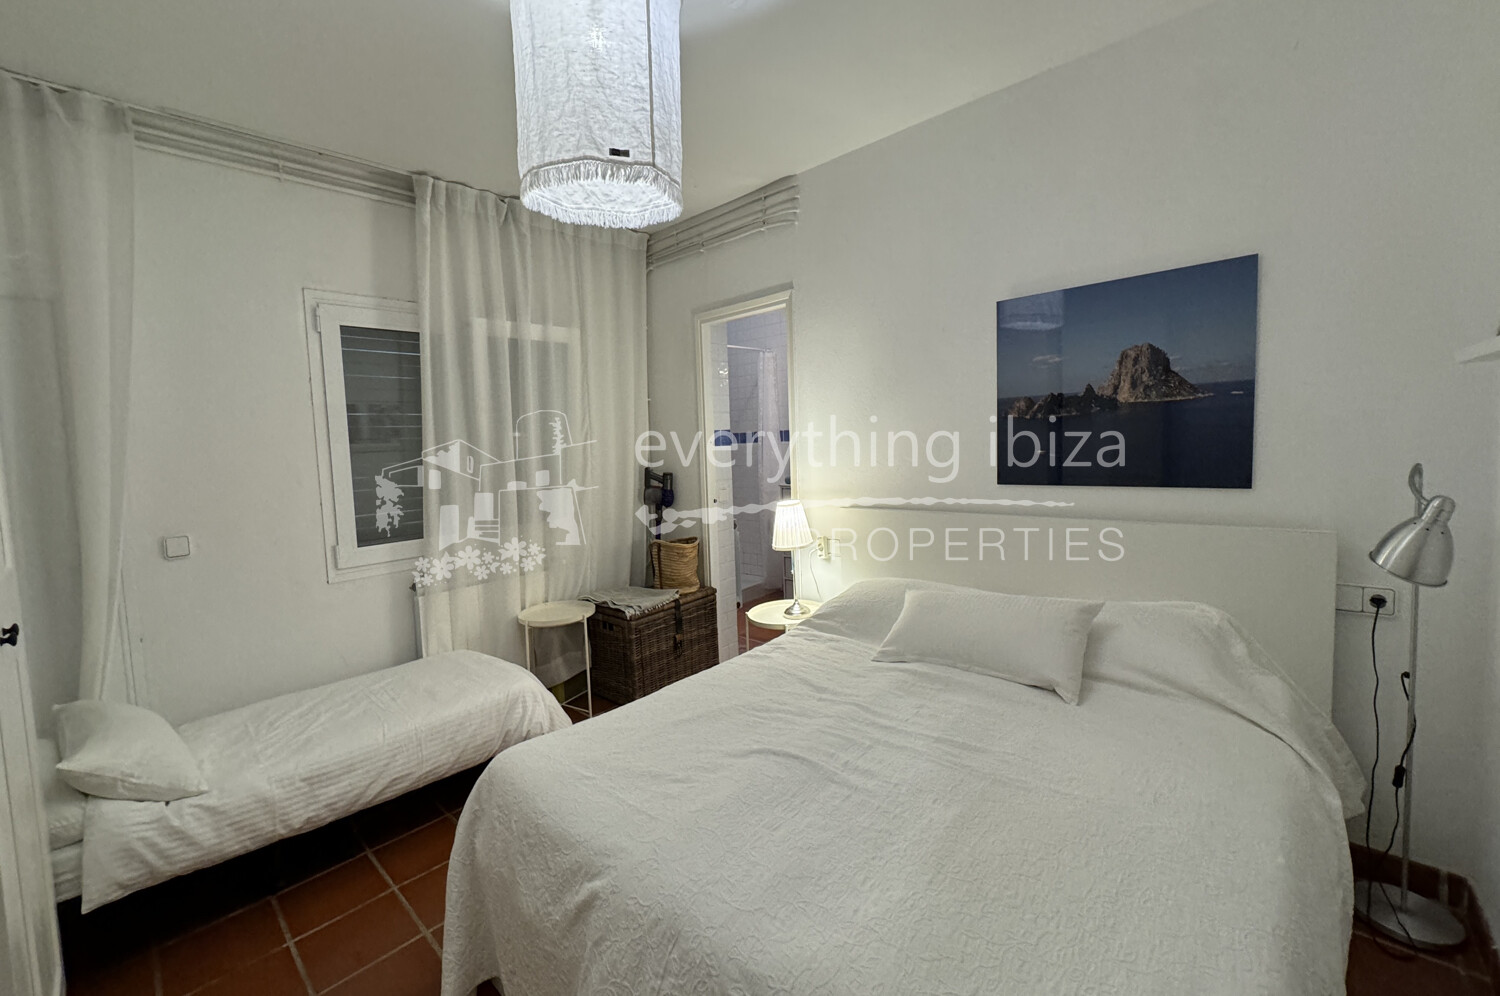 Charming Traditional Villa and 2 Separate Apartments with Super Sea & Sunset Views, ref. 1698, for sale in Ibiza by everything ibiza Properties